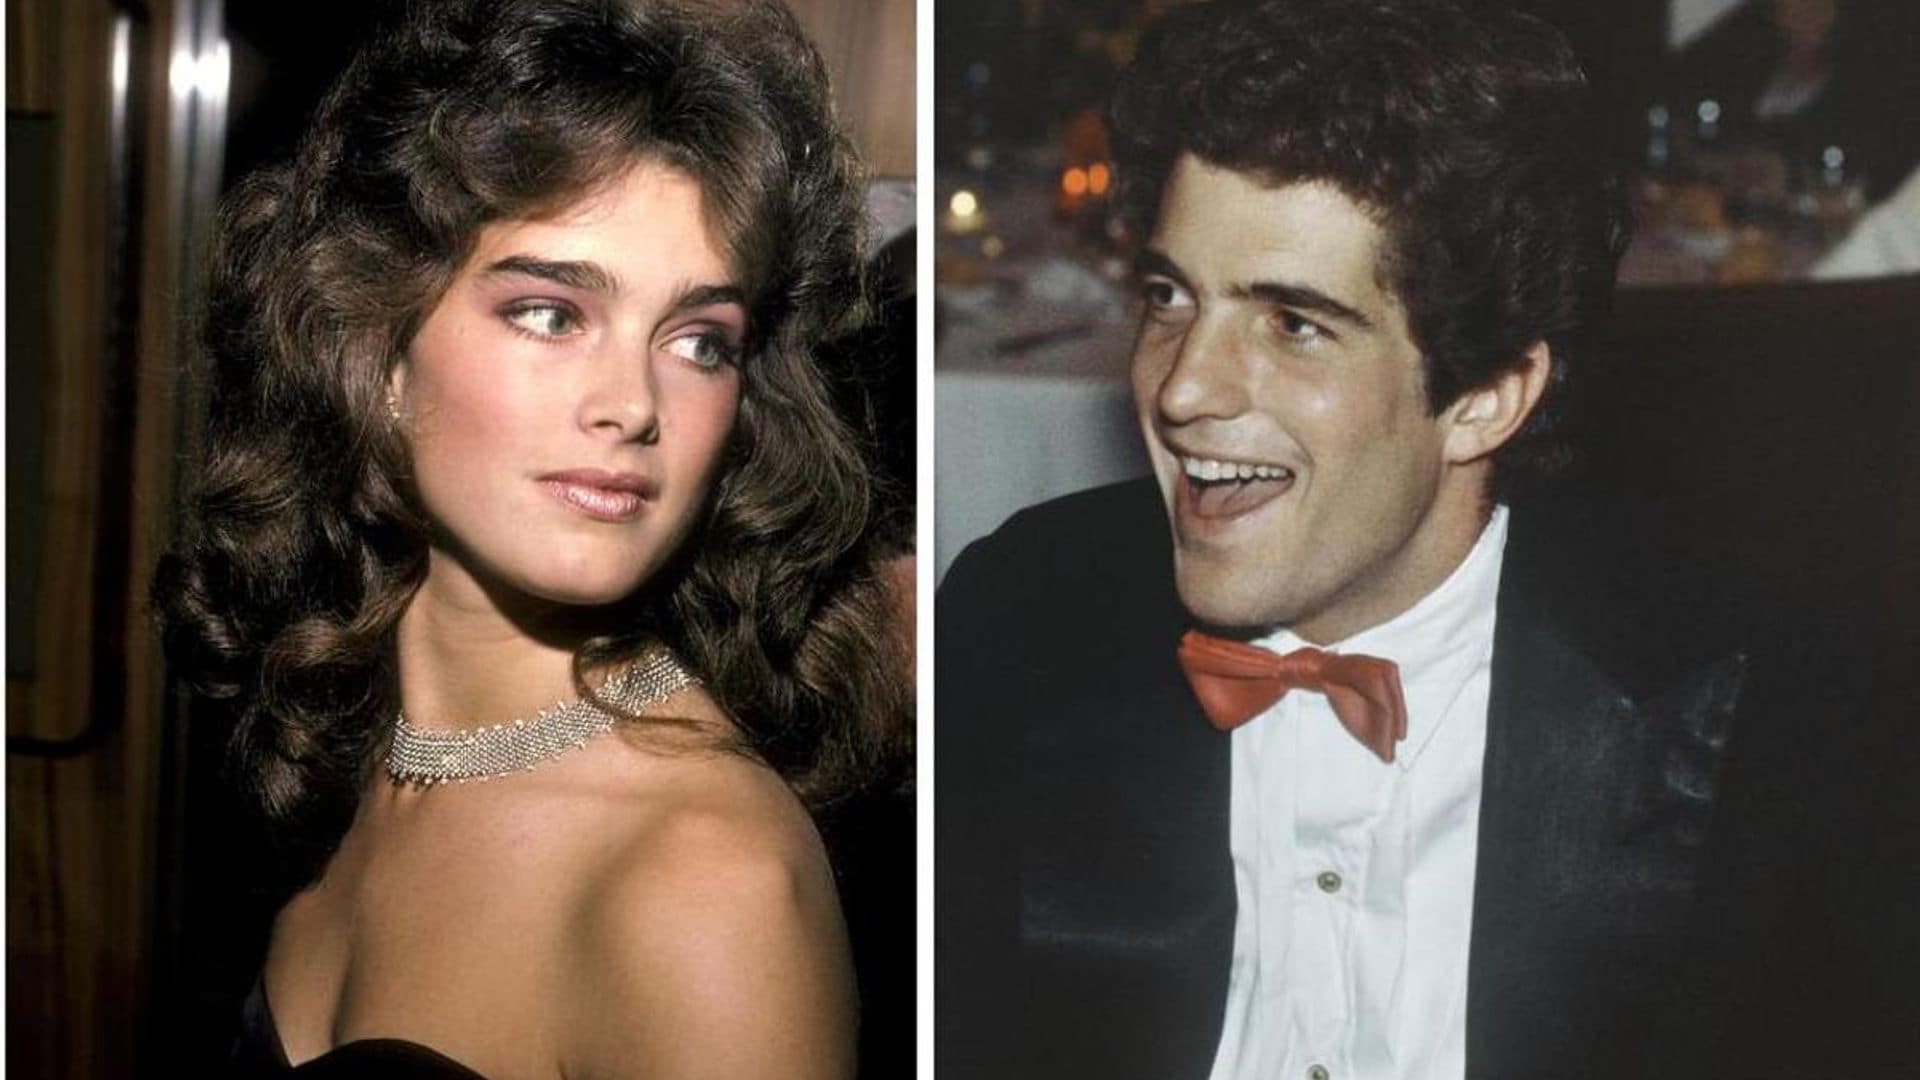 Brooke Shields says JFK Jr. made her take a cab home after she didn’t sleep with him